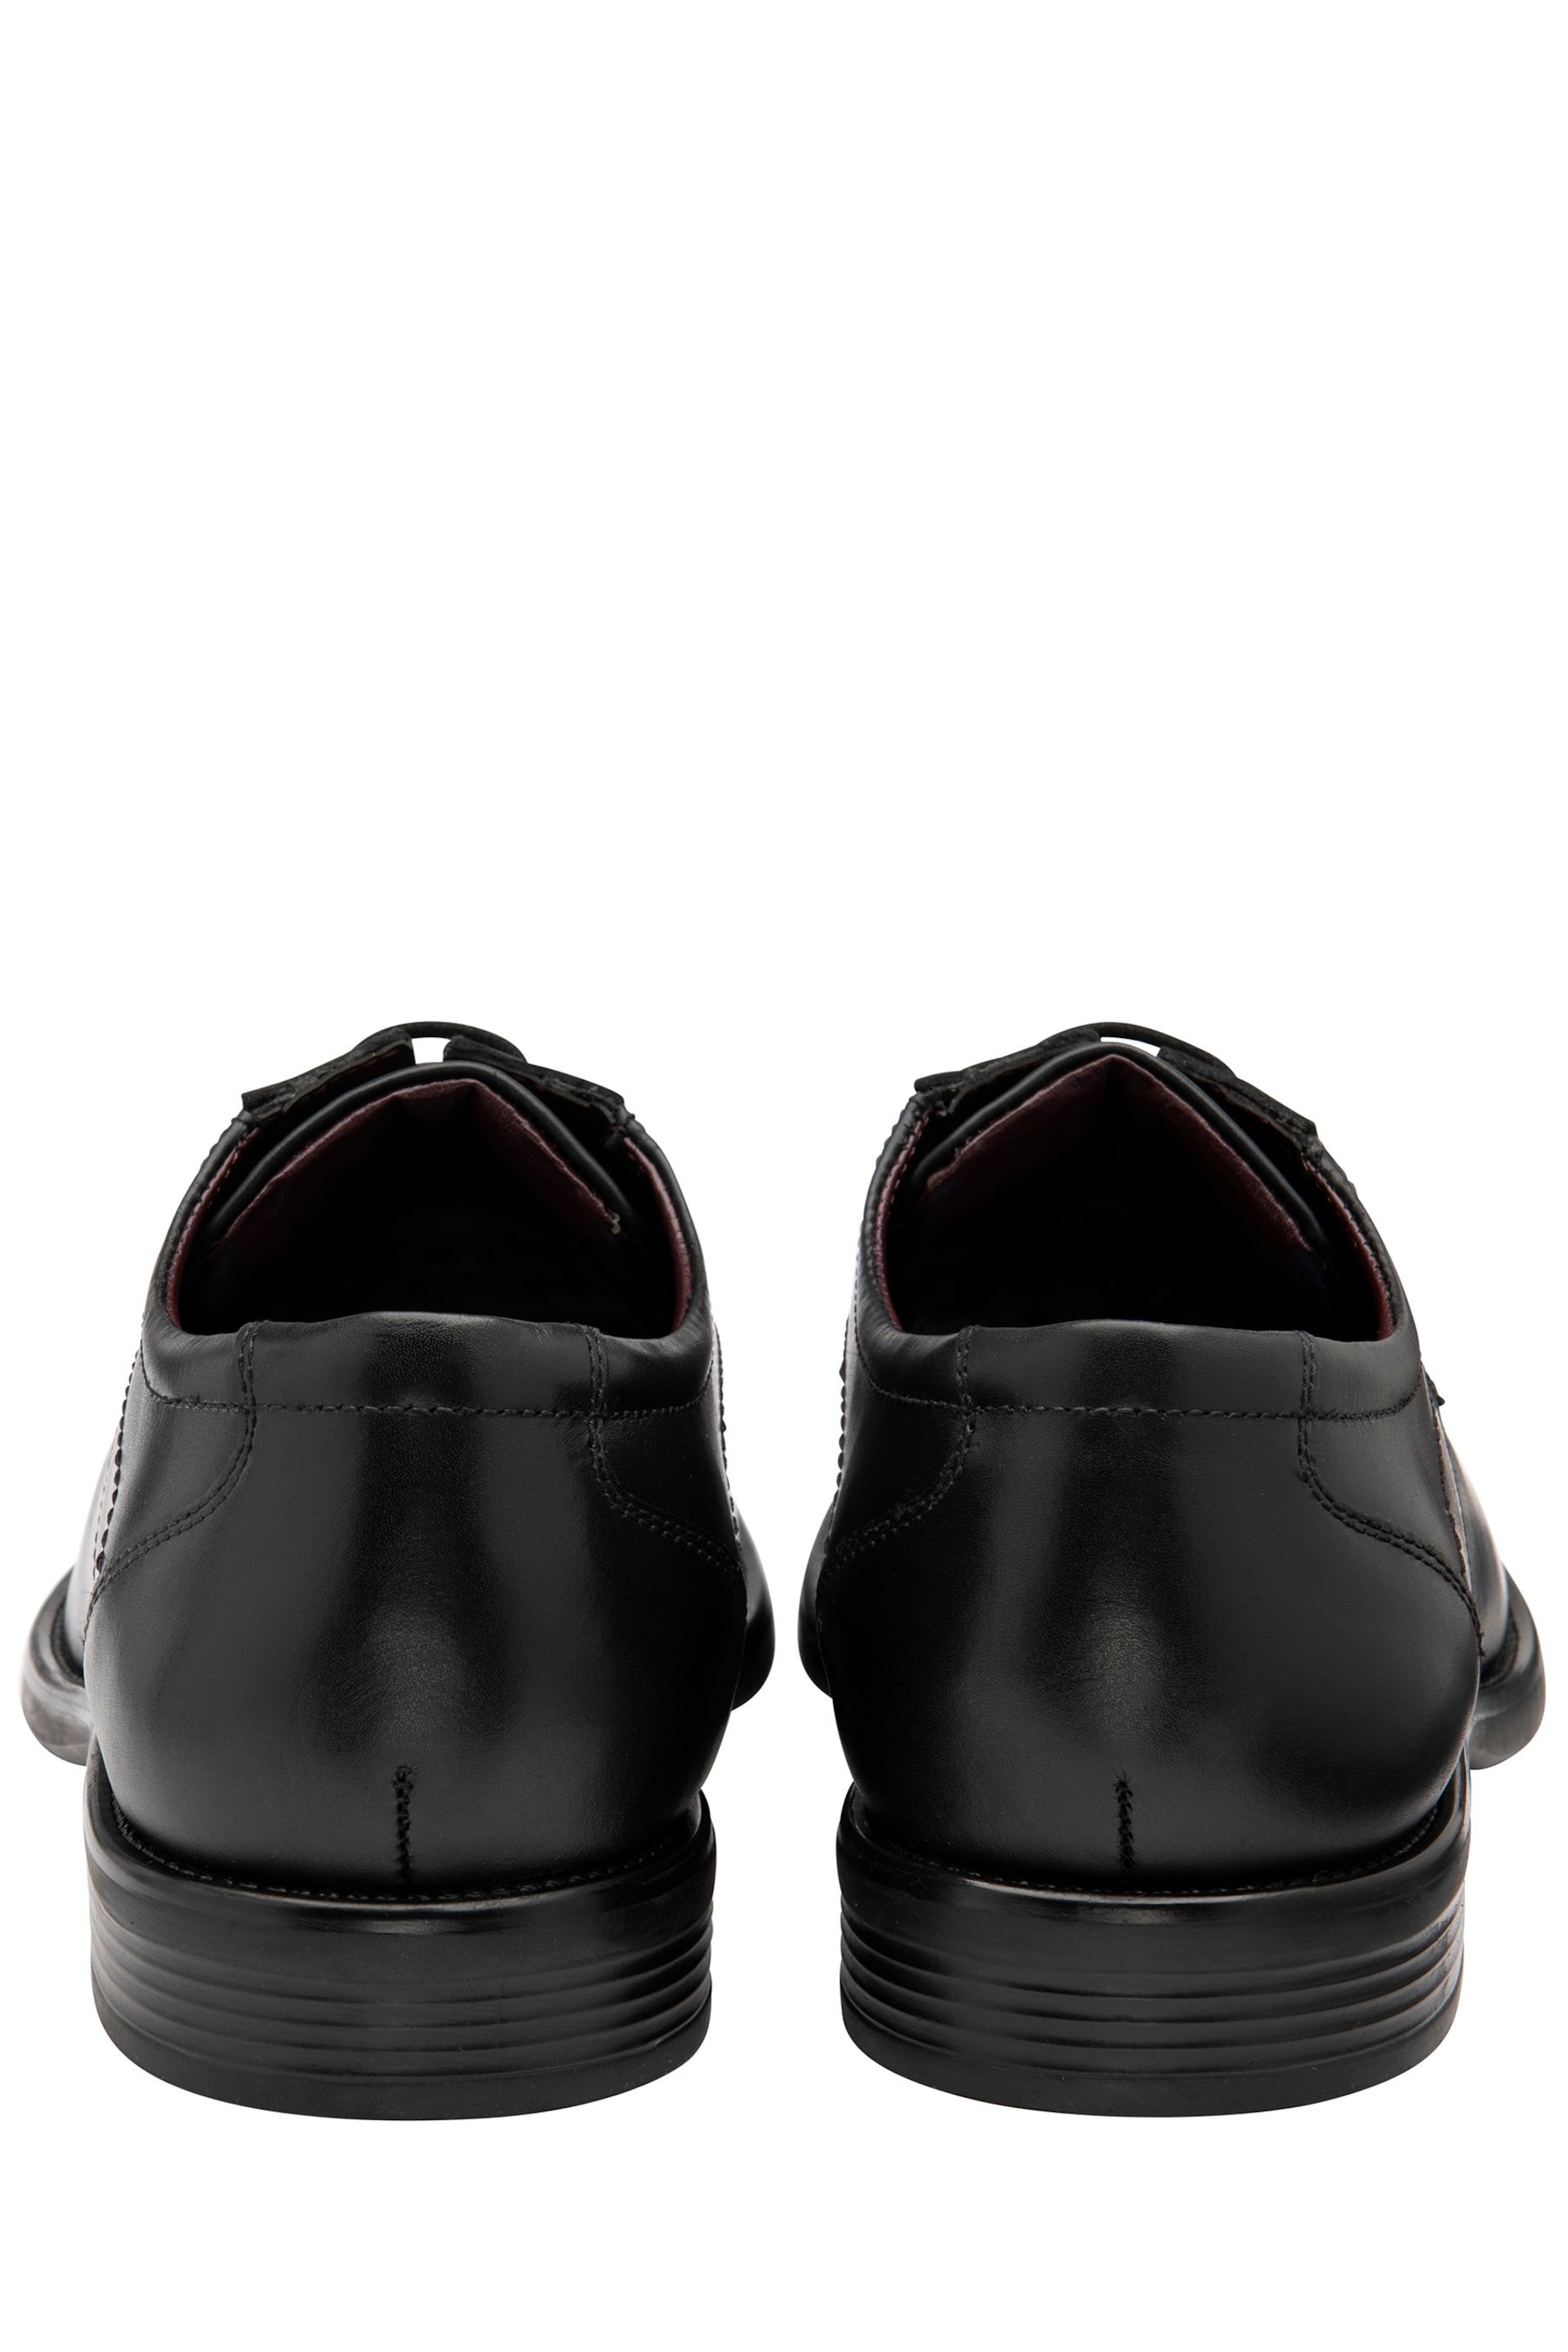 Lotus Black Leather Derby Shoes - Image 3 of 4